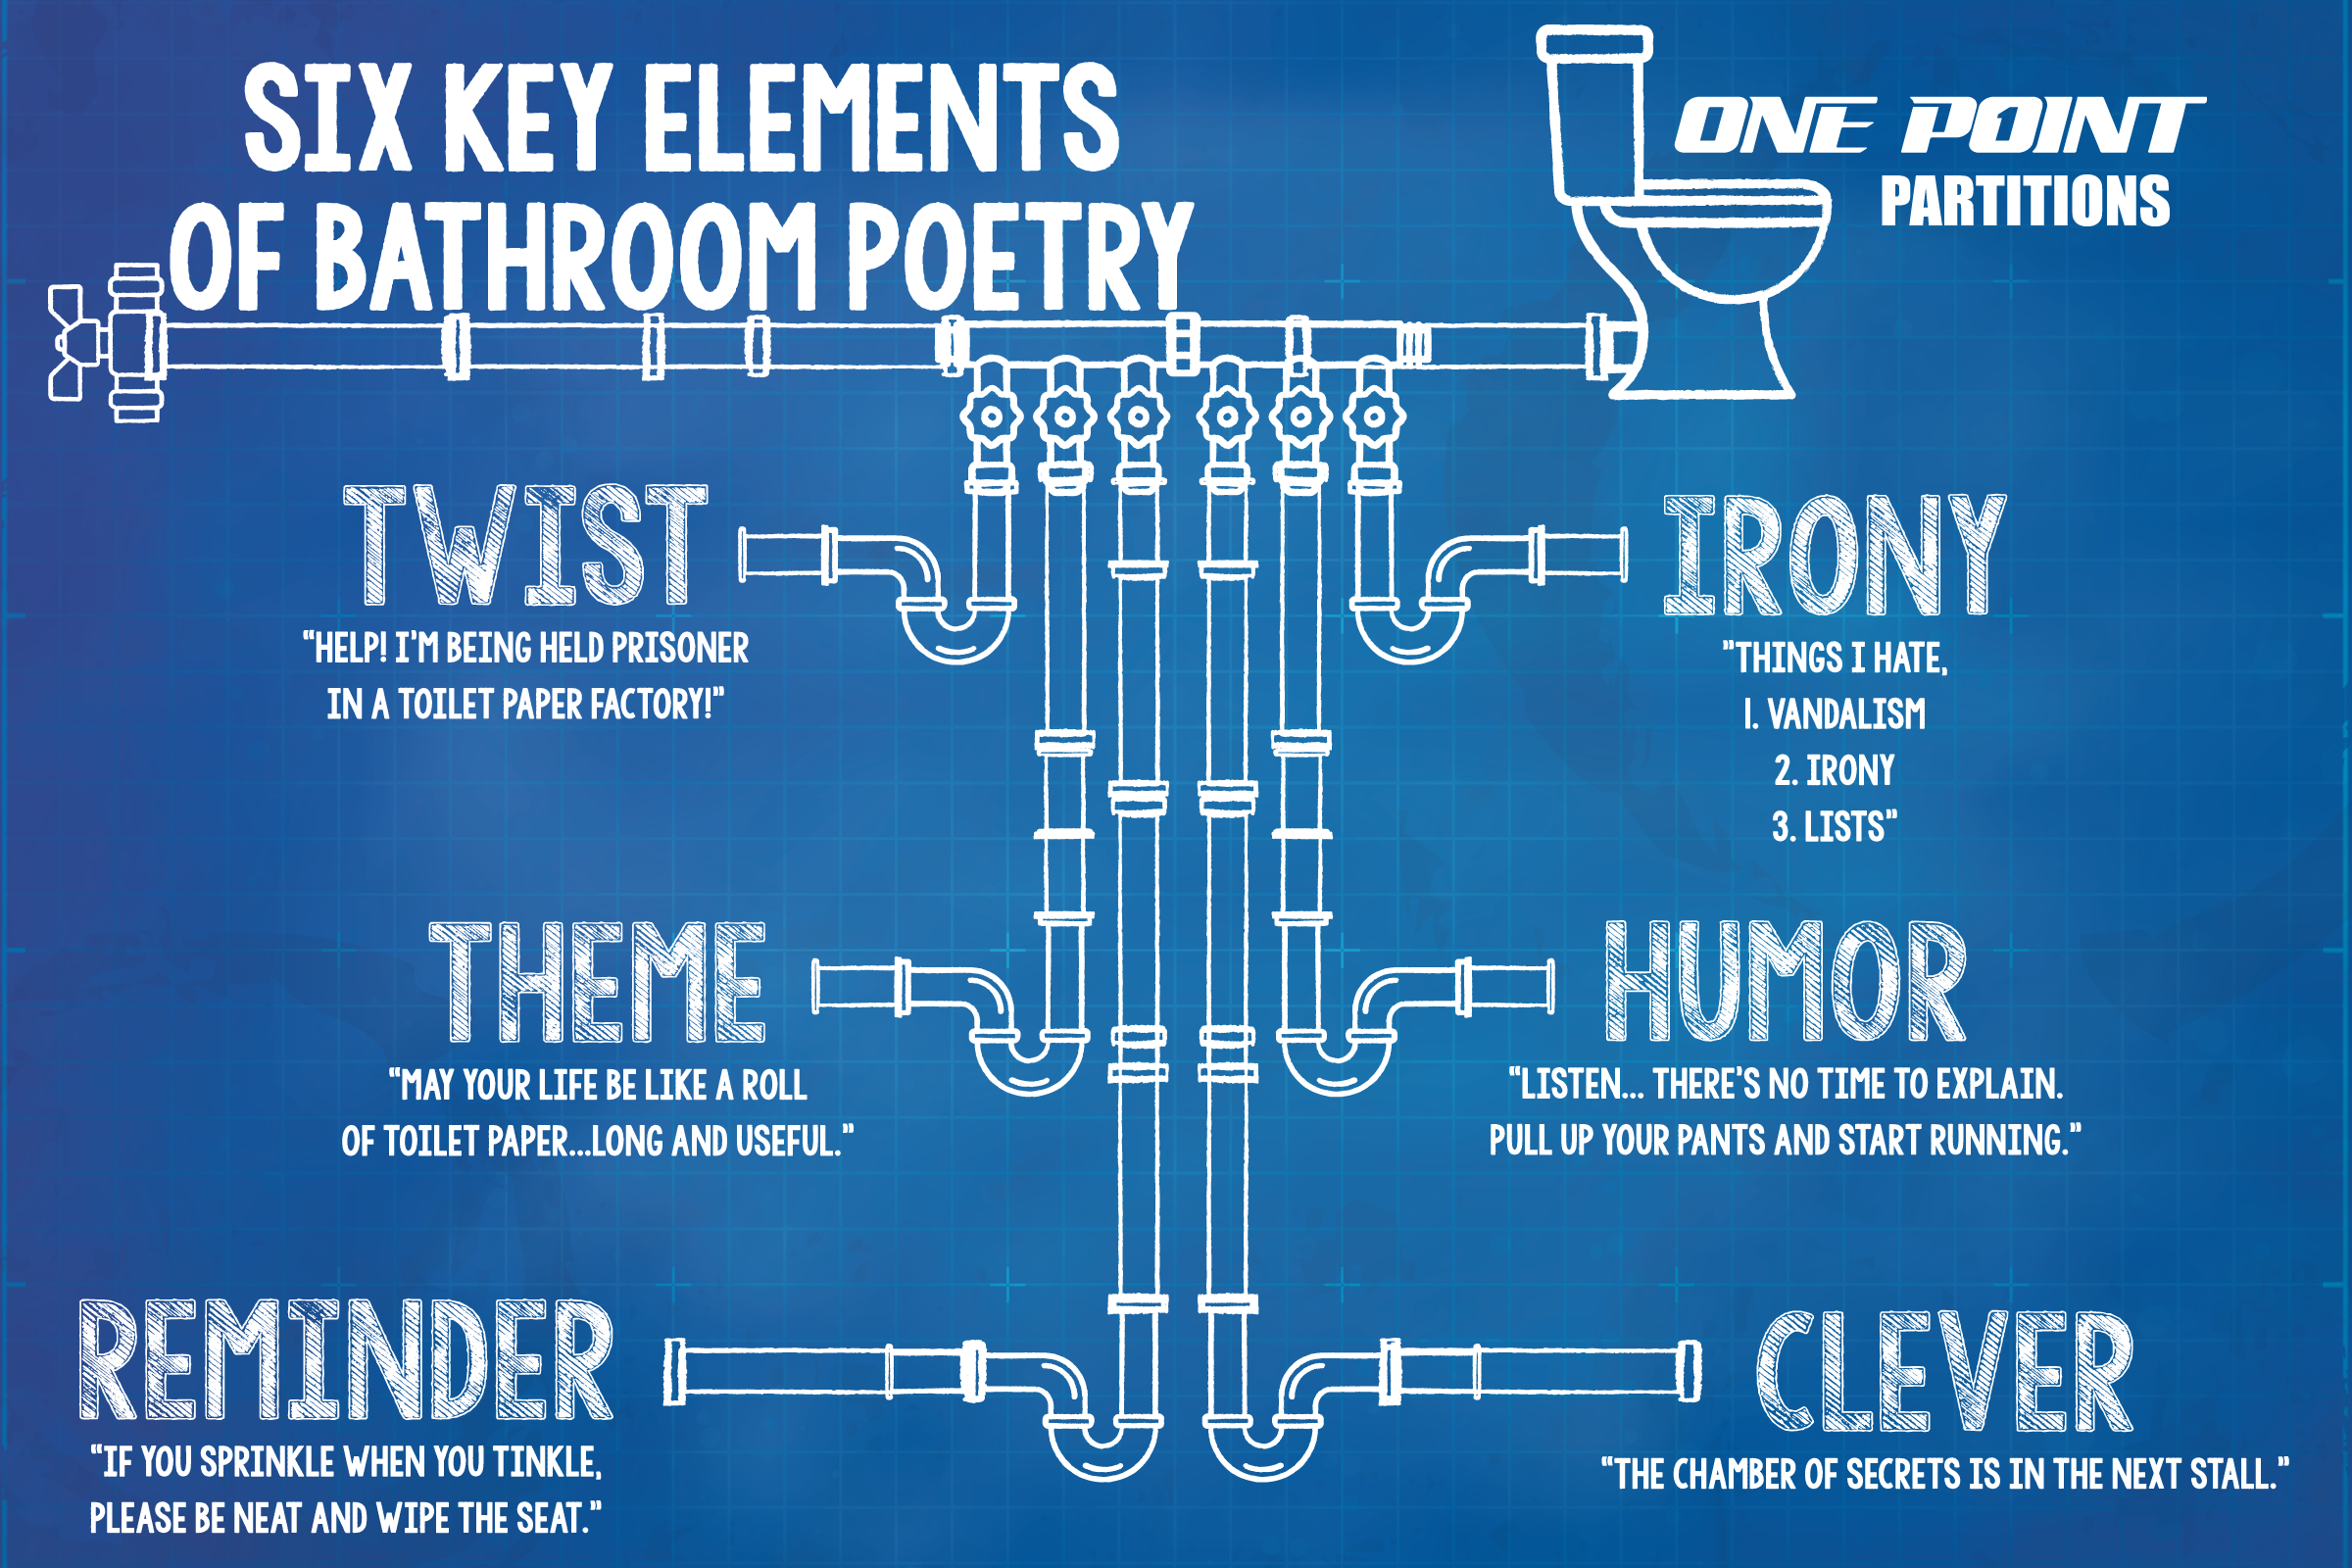 The Best of Bathroom Stall Poetry | One Point Partitions